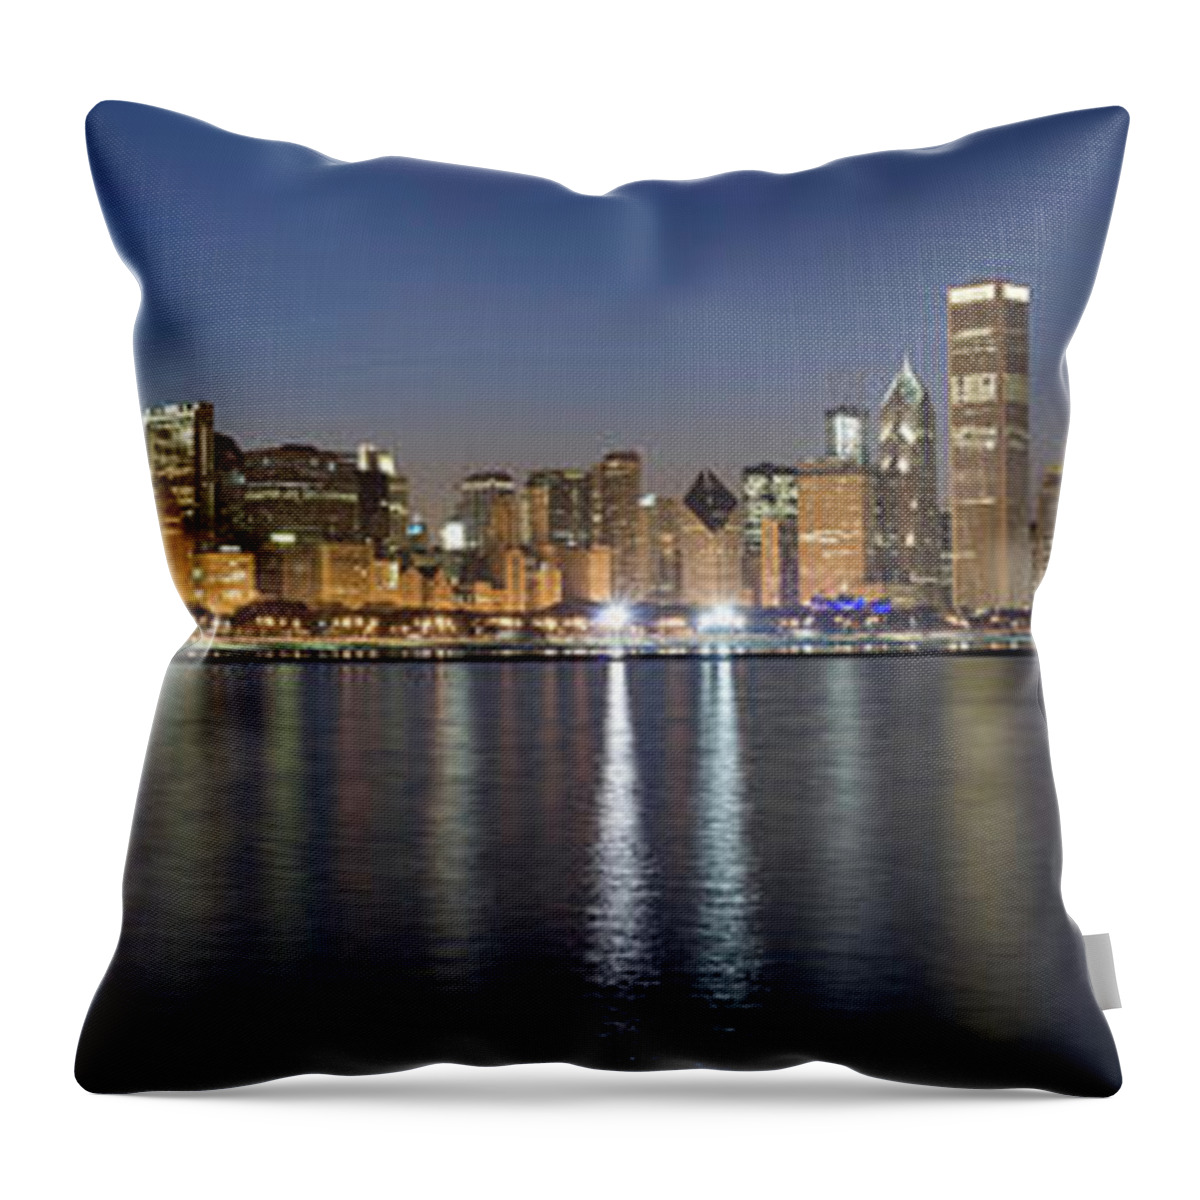 Water's Edge Throw Pillow featuring the photograph Panoramic View Of The Chicago Skyline by Chrisp0